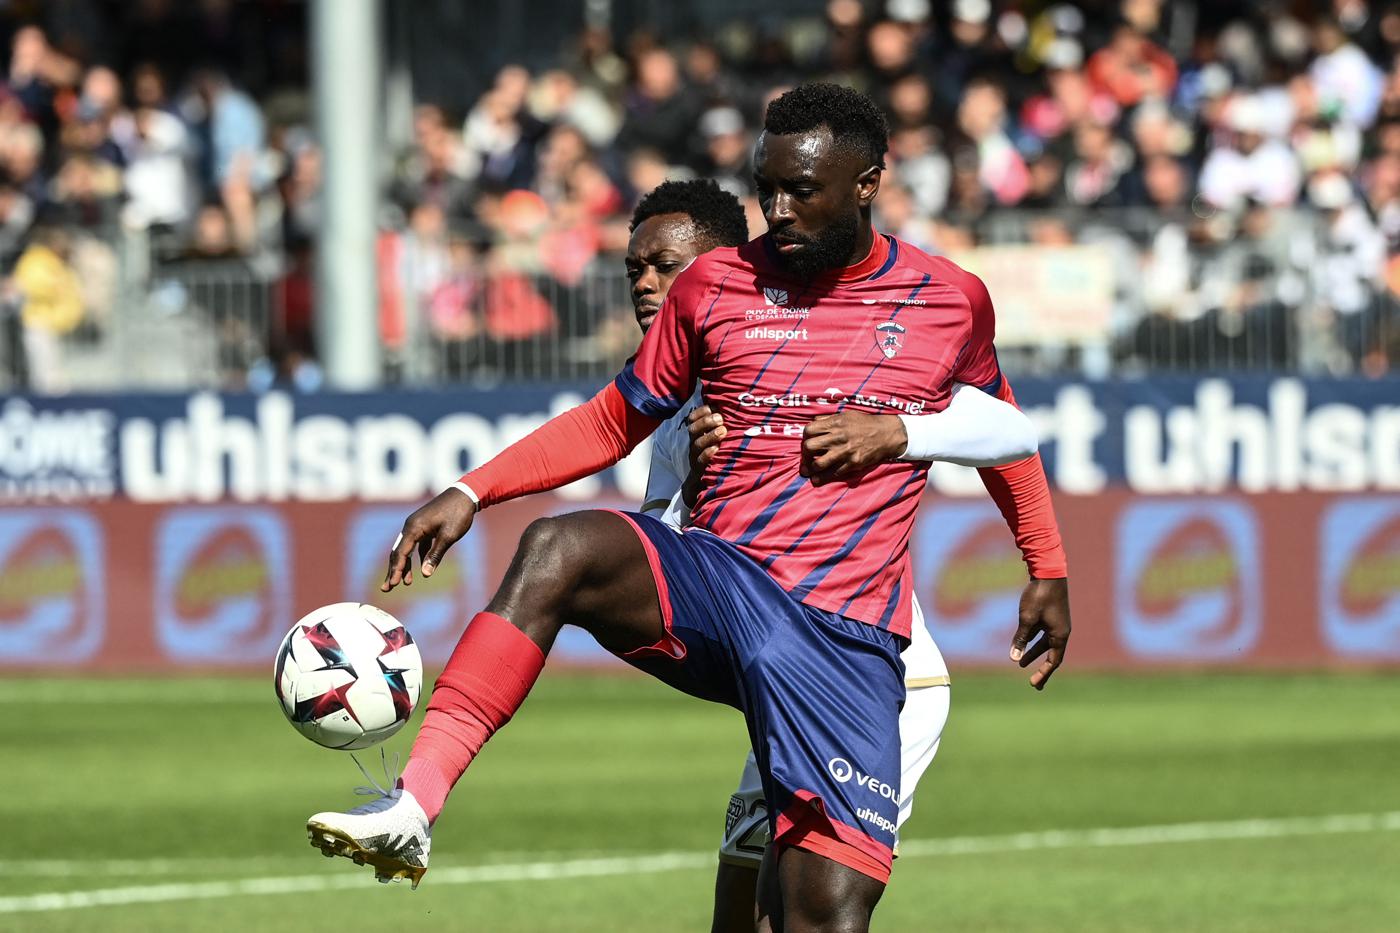 Clermont - Angers - 2:1. French Championship, 31st round. Match review, statistics